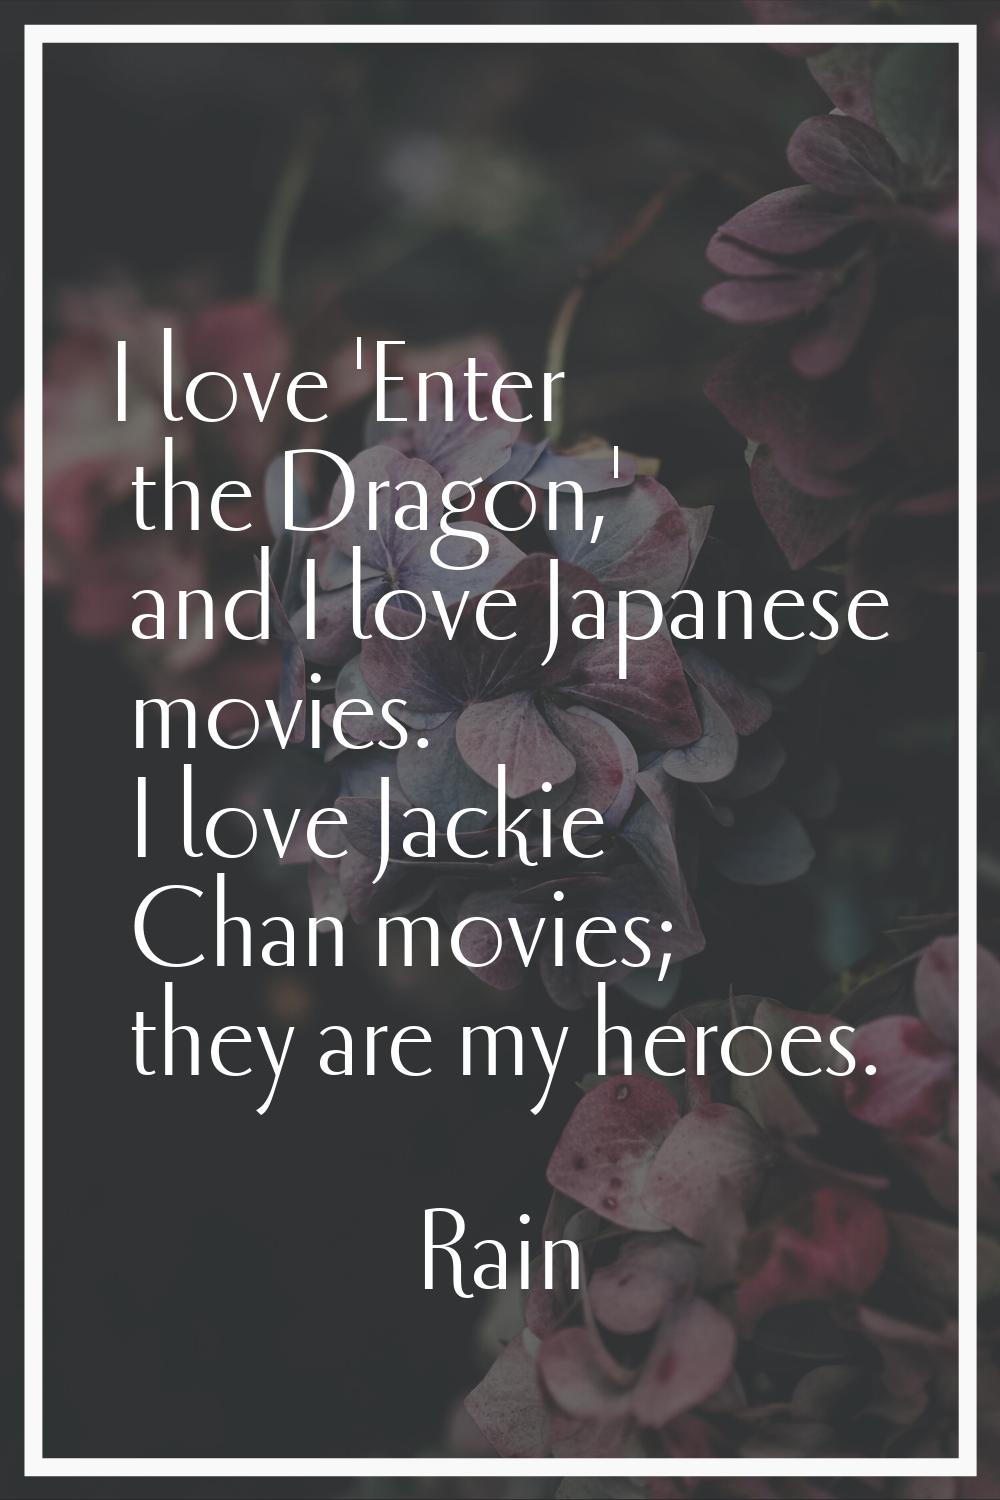 I love 'Enter the Dragon,' and I love Japanese movies. I love Jackie Chan movies; they are my heroe